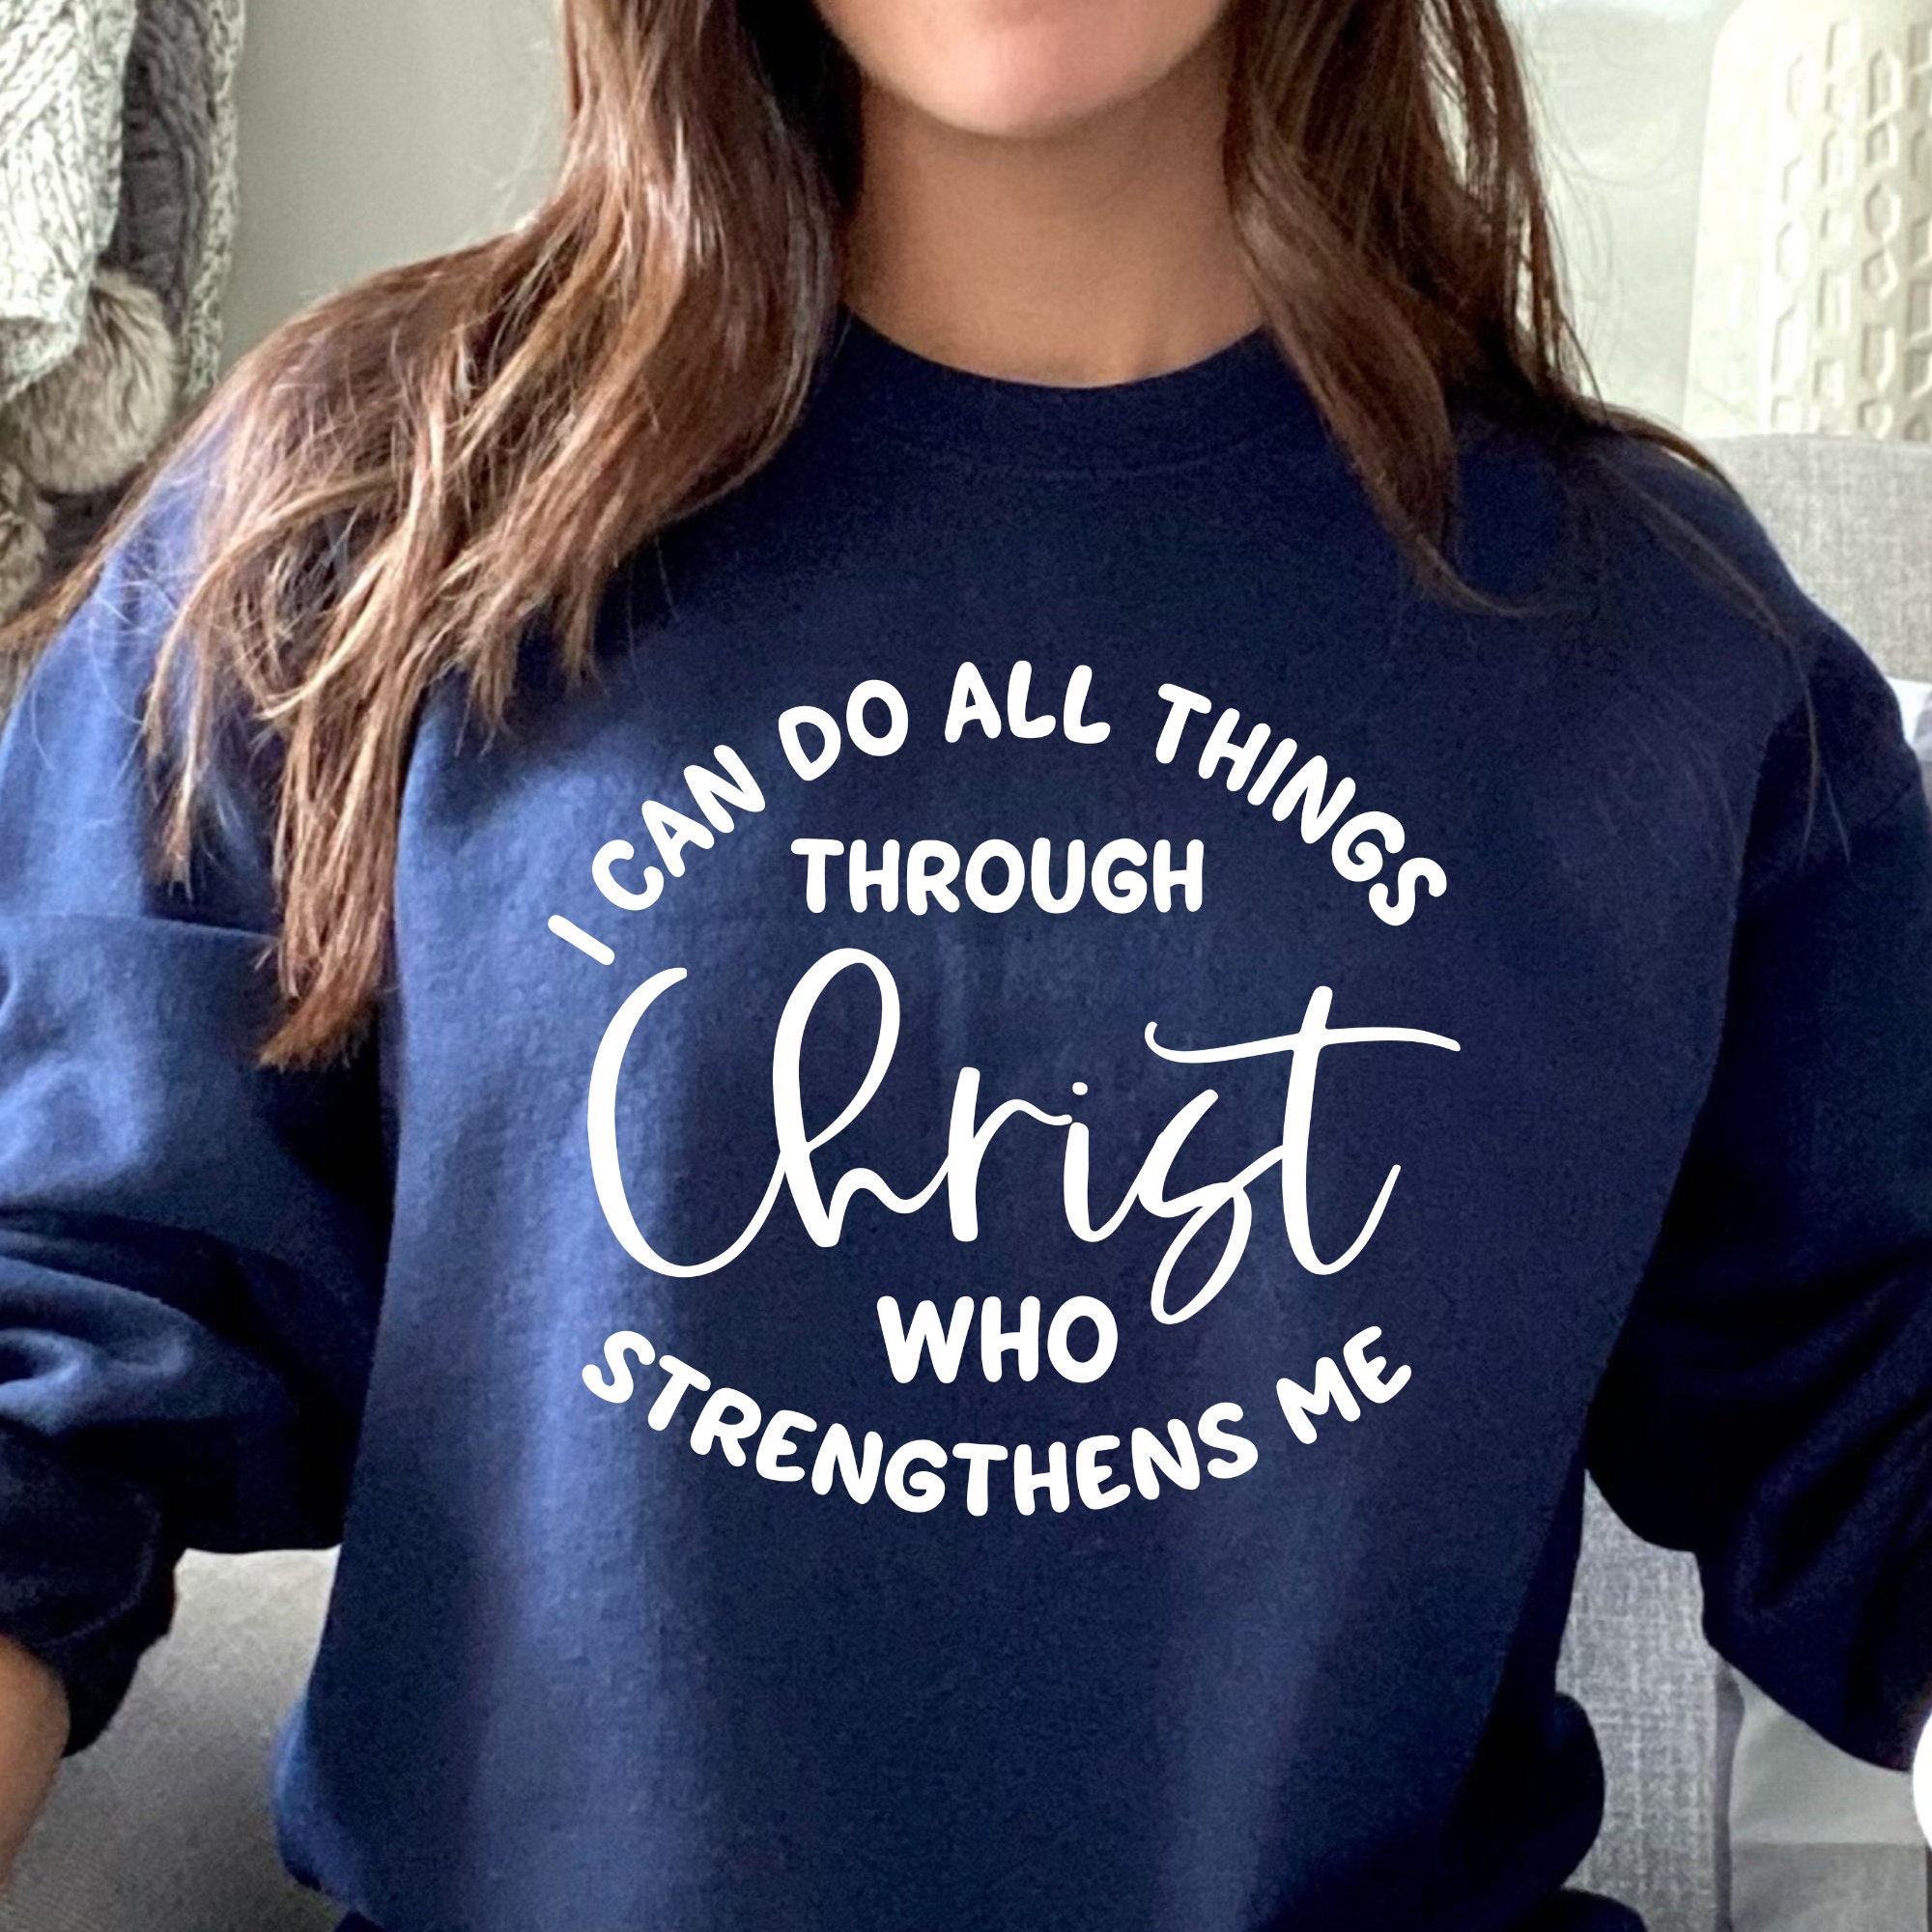 I Can Do All Things Through Christ Who Strengthens Me SVG - Etsy